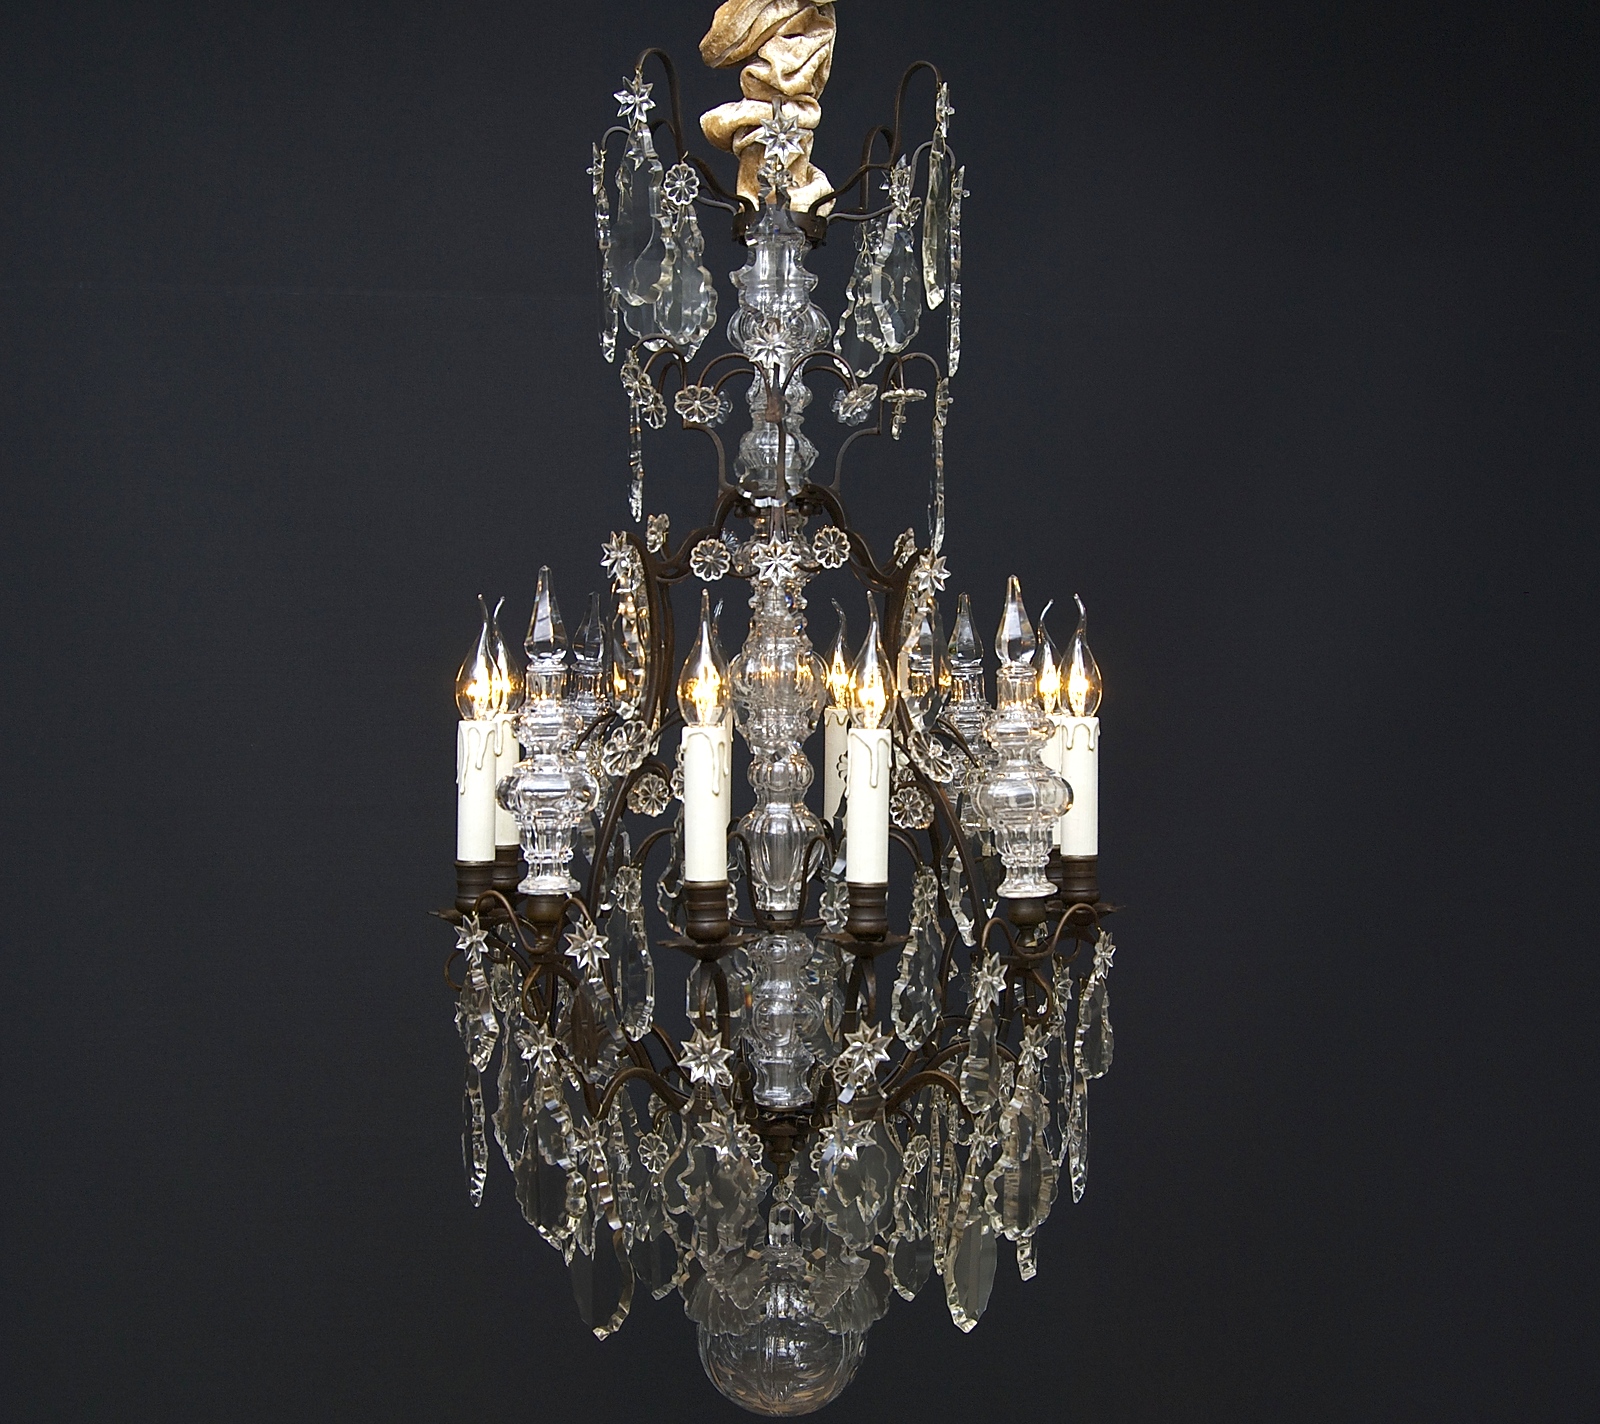 19th century French crystal chandelier with 8 light